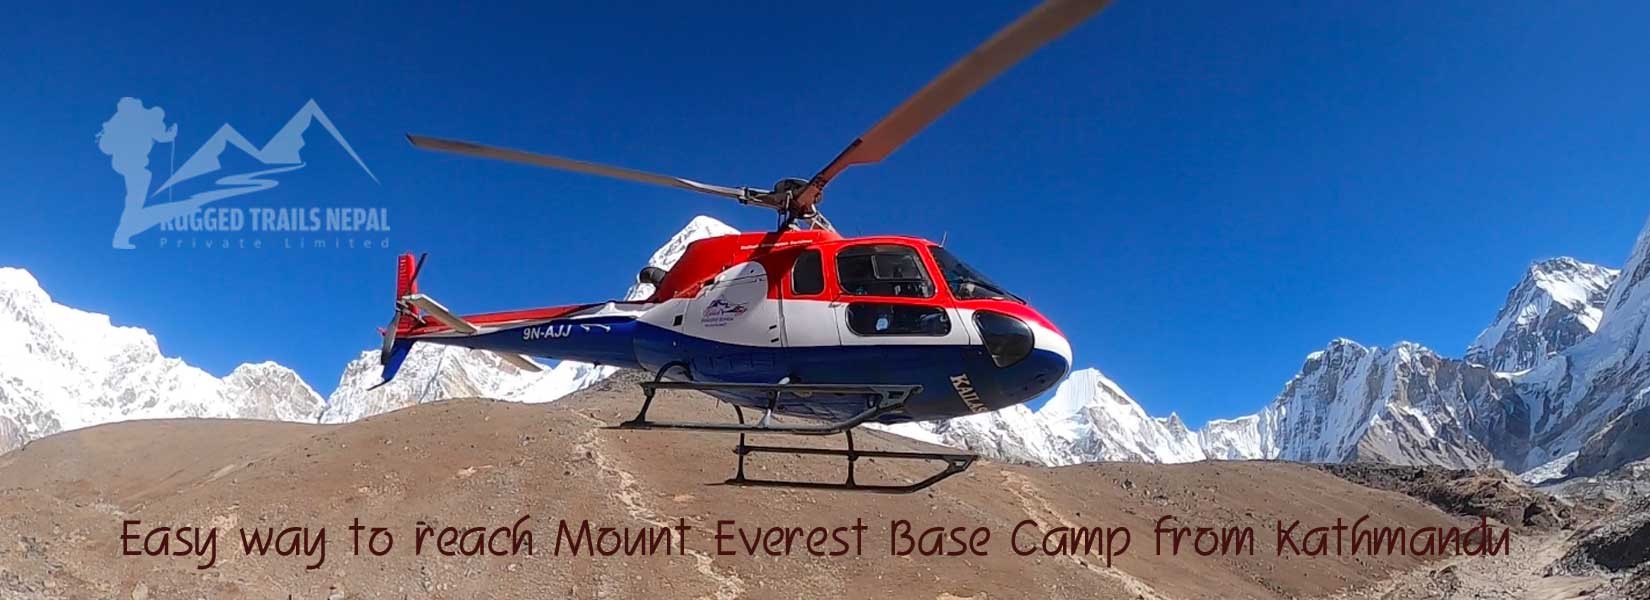 best way to reach nepal mount everest base camp by helicopter